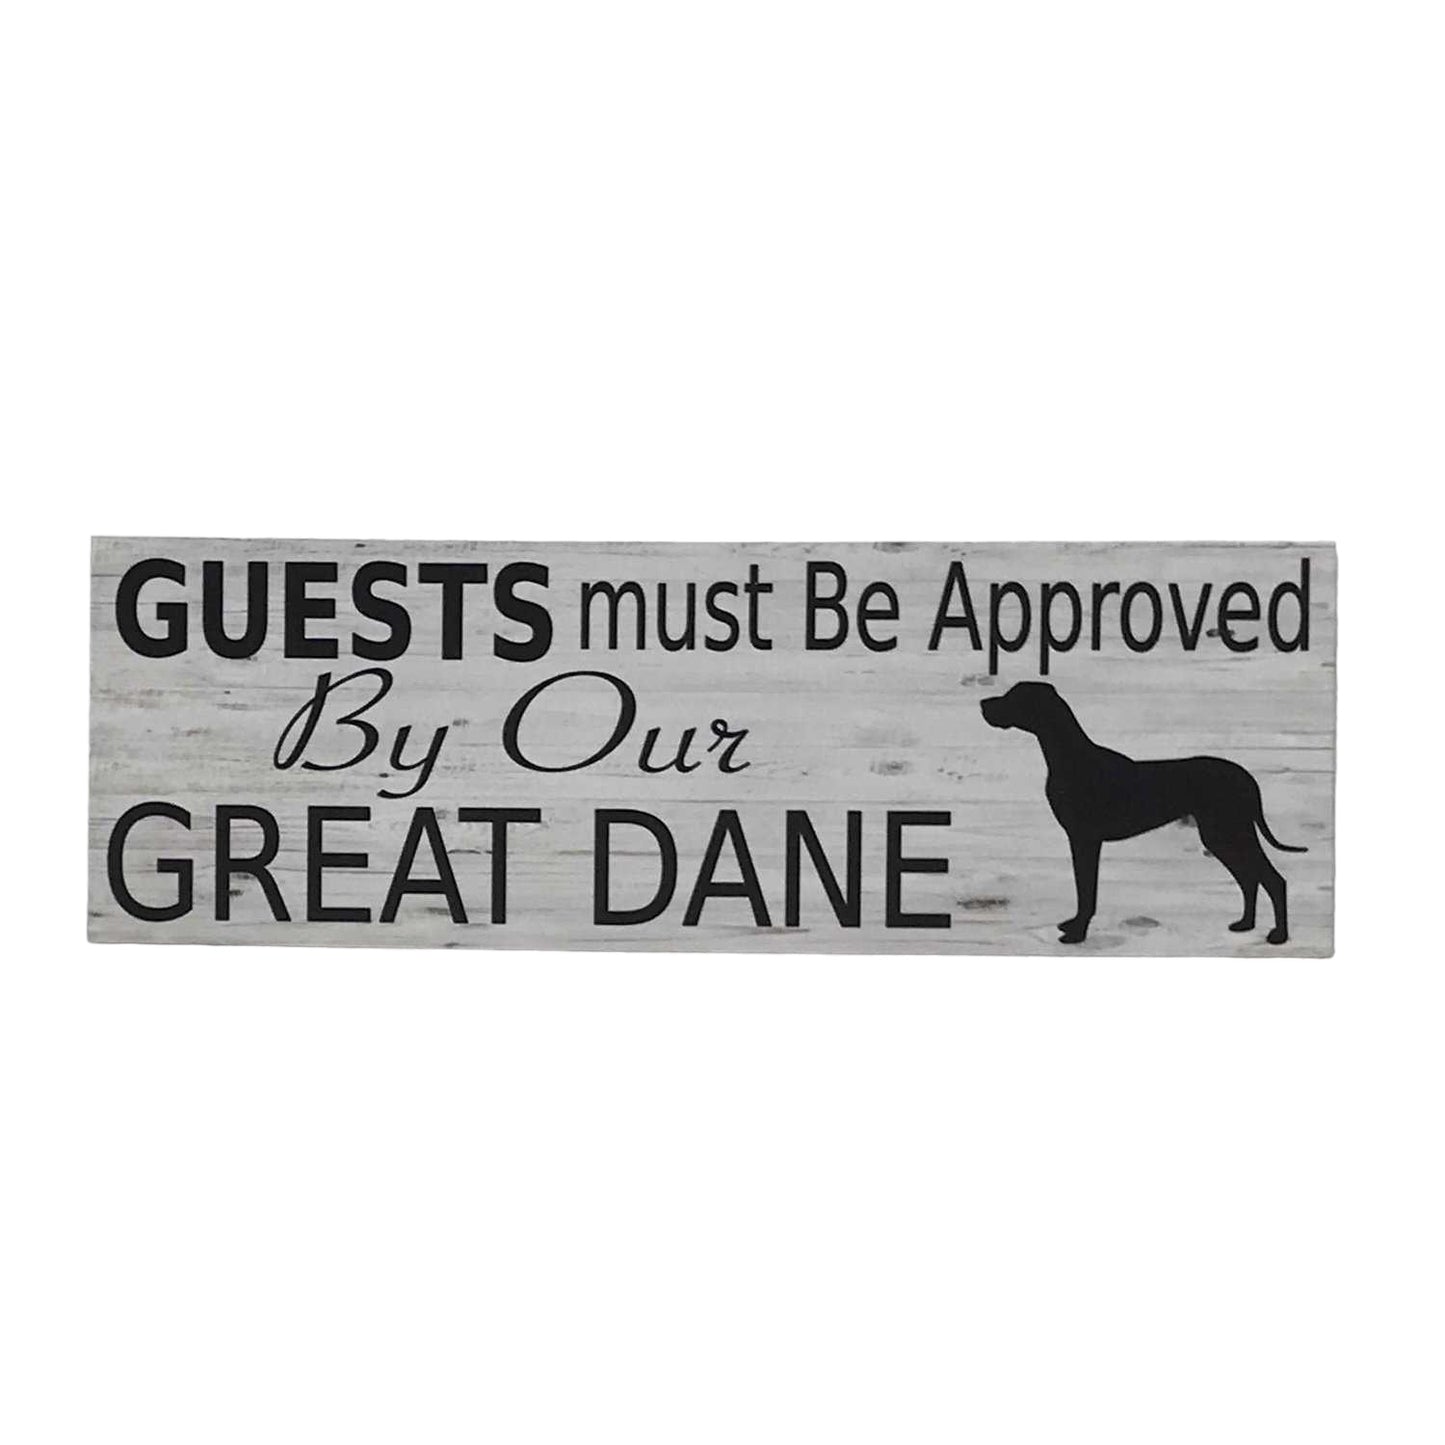 Great Dane Dog Guests Must Be Approved By Our Sign